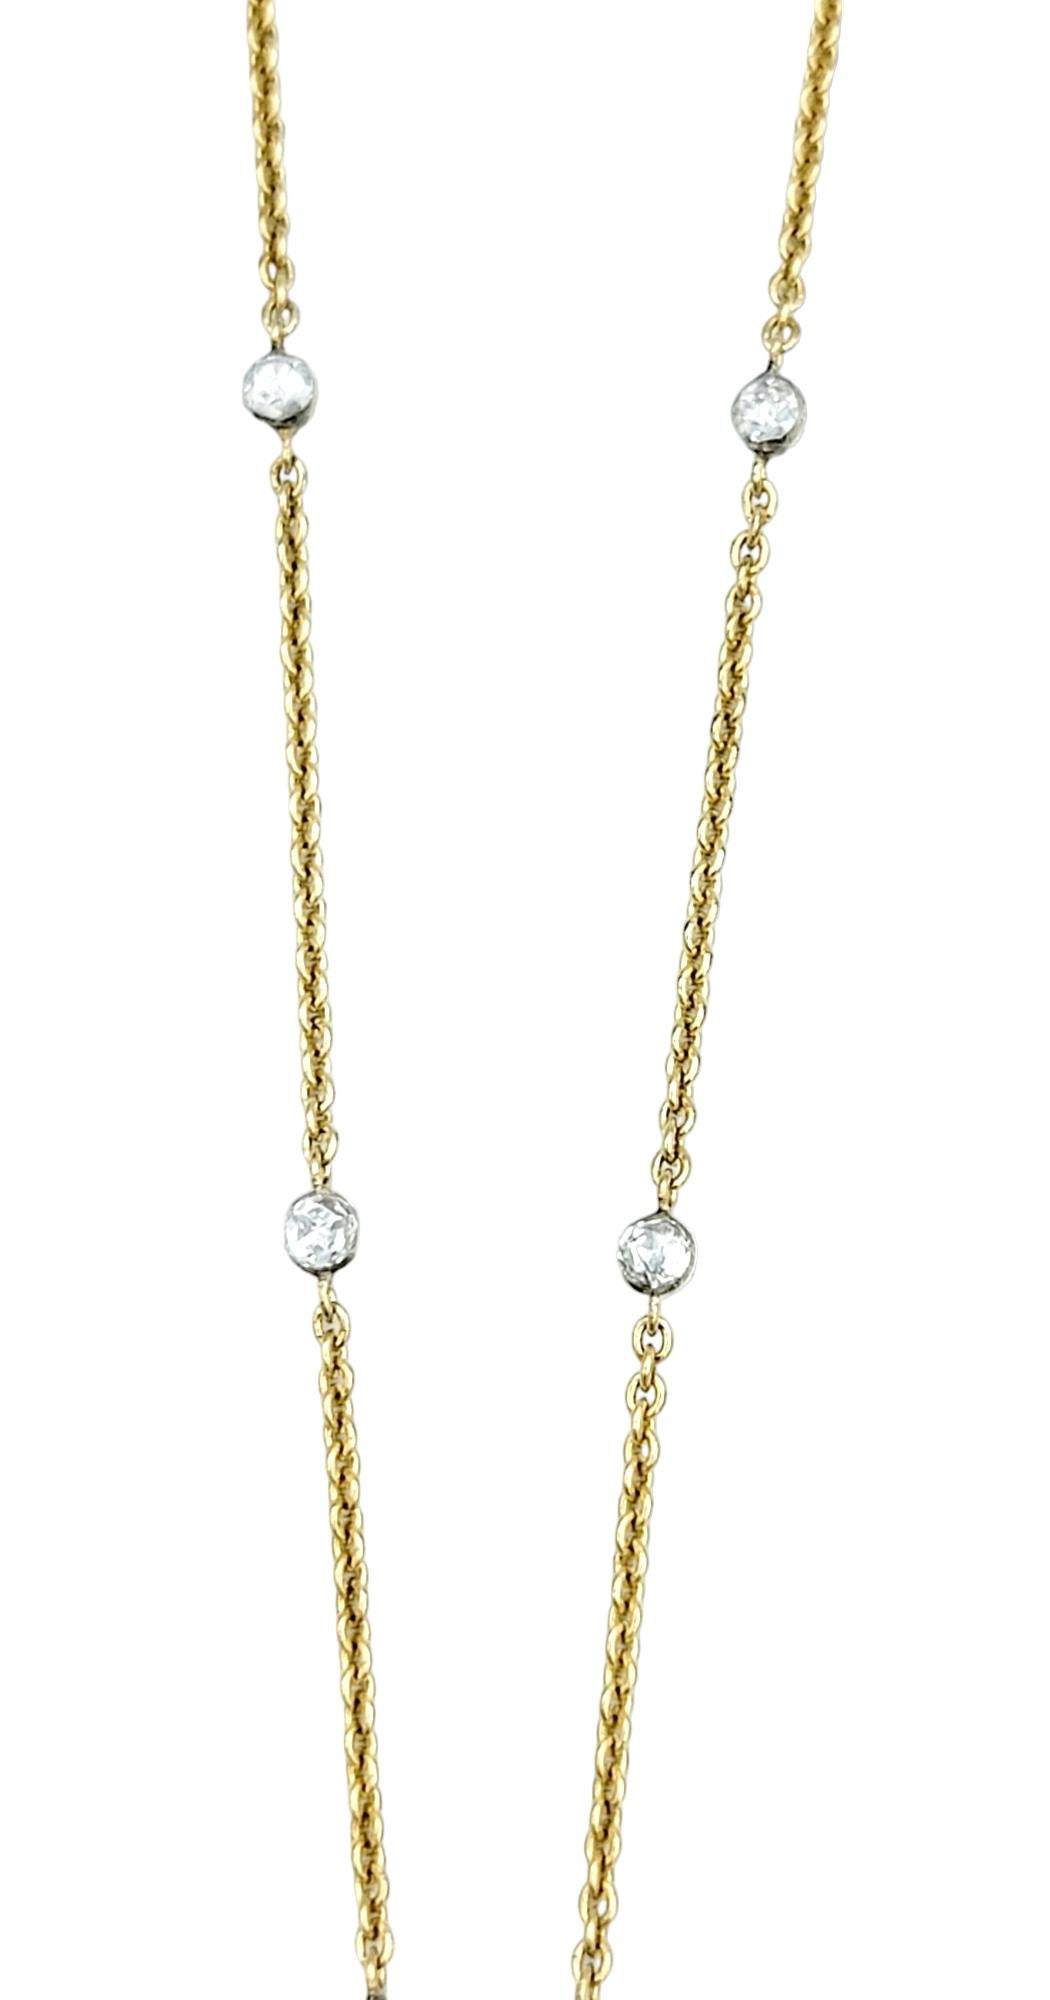 Gilan Open Circle Diamond Dangle Pendant Necklace in 14 Karat Yellow Gold In Good Condition For Sale In Scottsdale, AZ